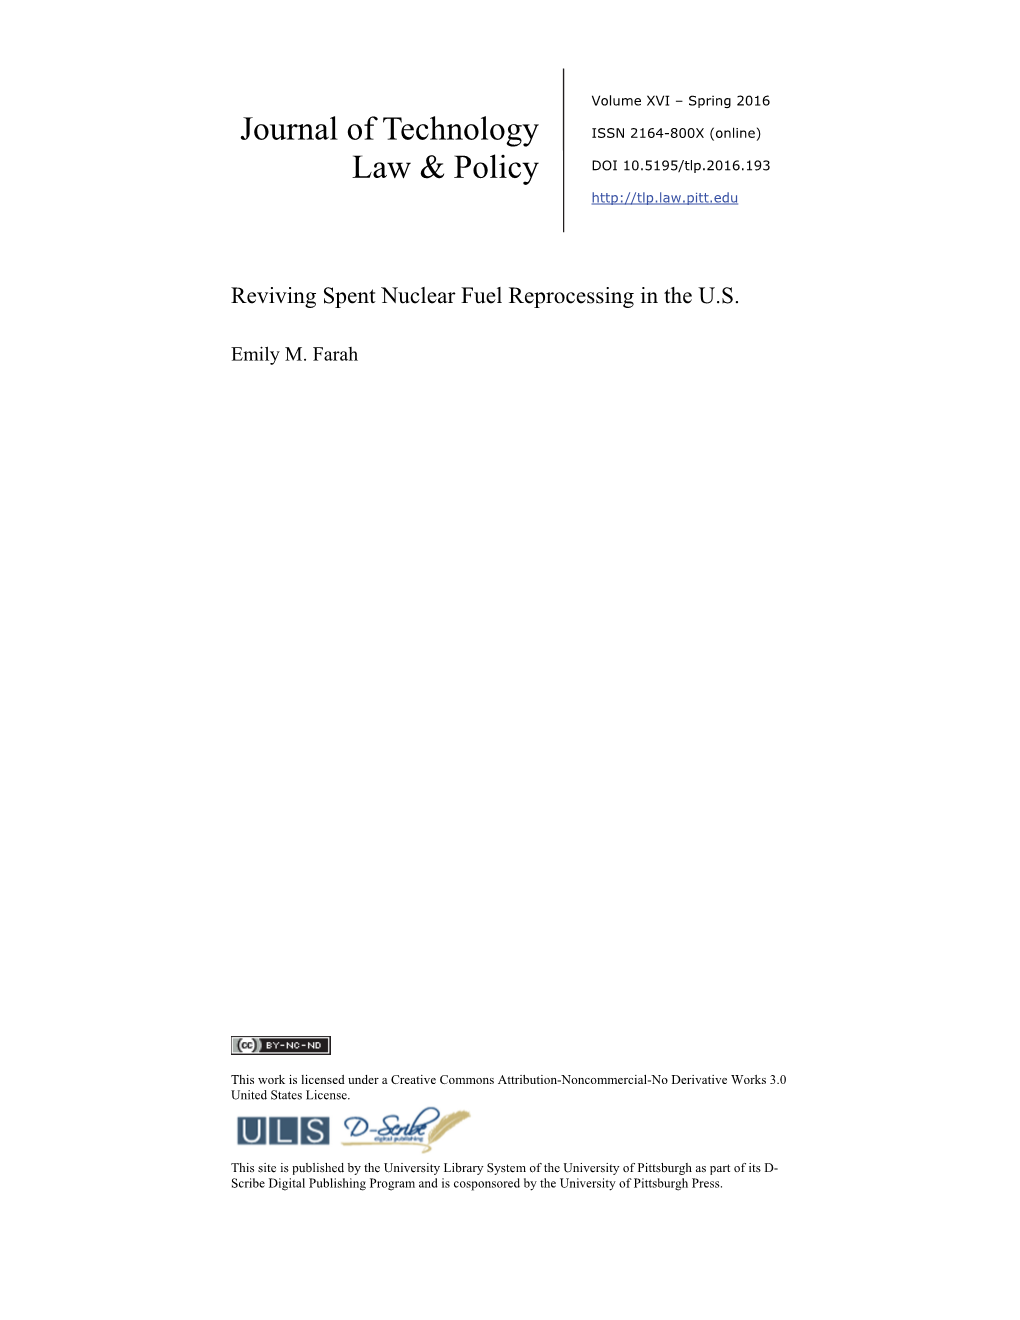 Journal of Technology Law & Policy